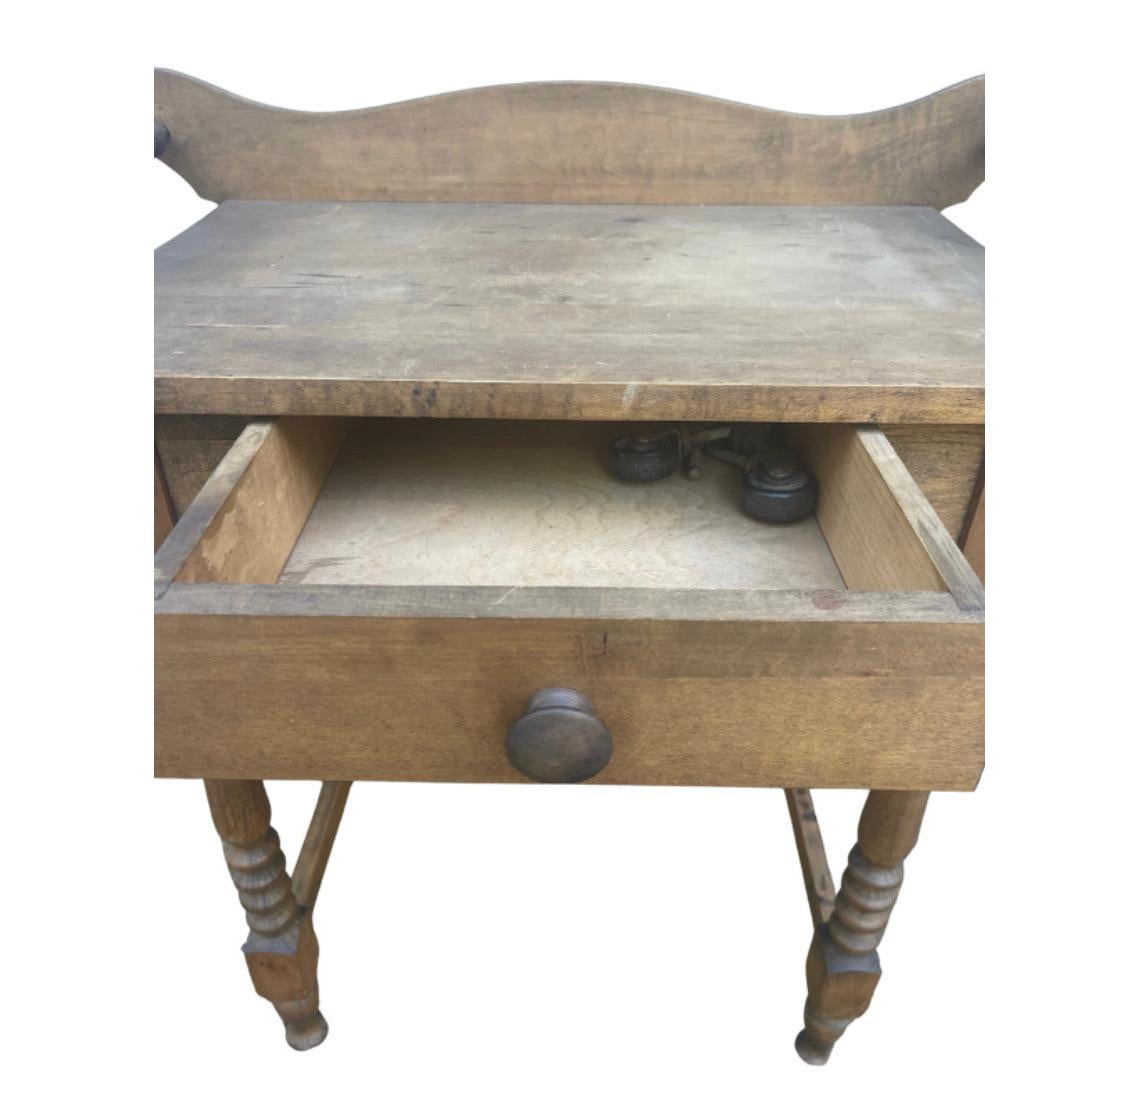 Beautiful, brown toned antique washstand. Use with a vessel sink or as a side table. 